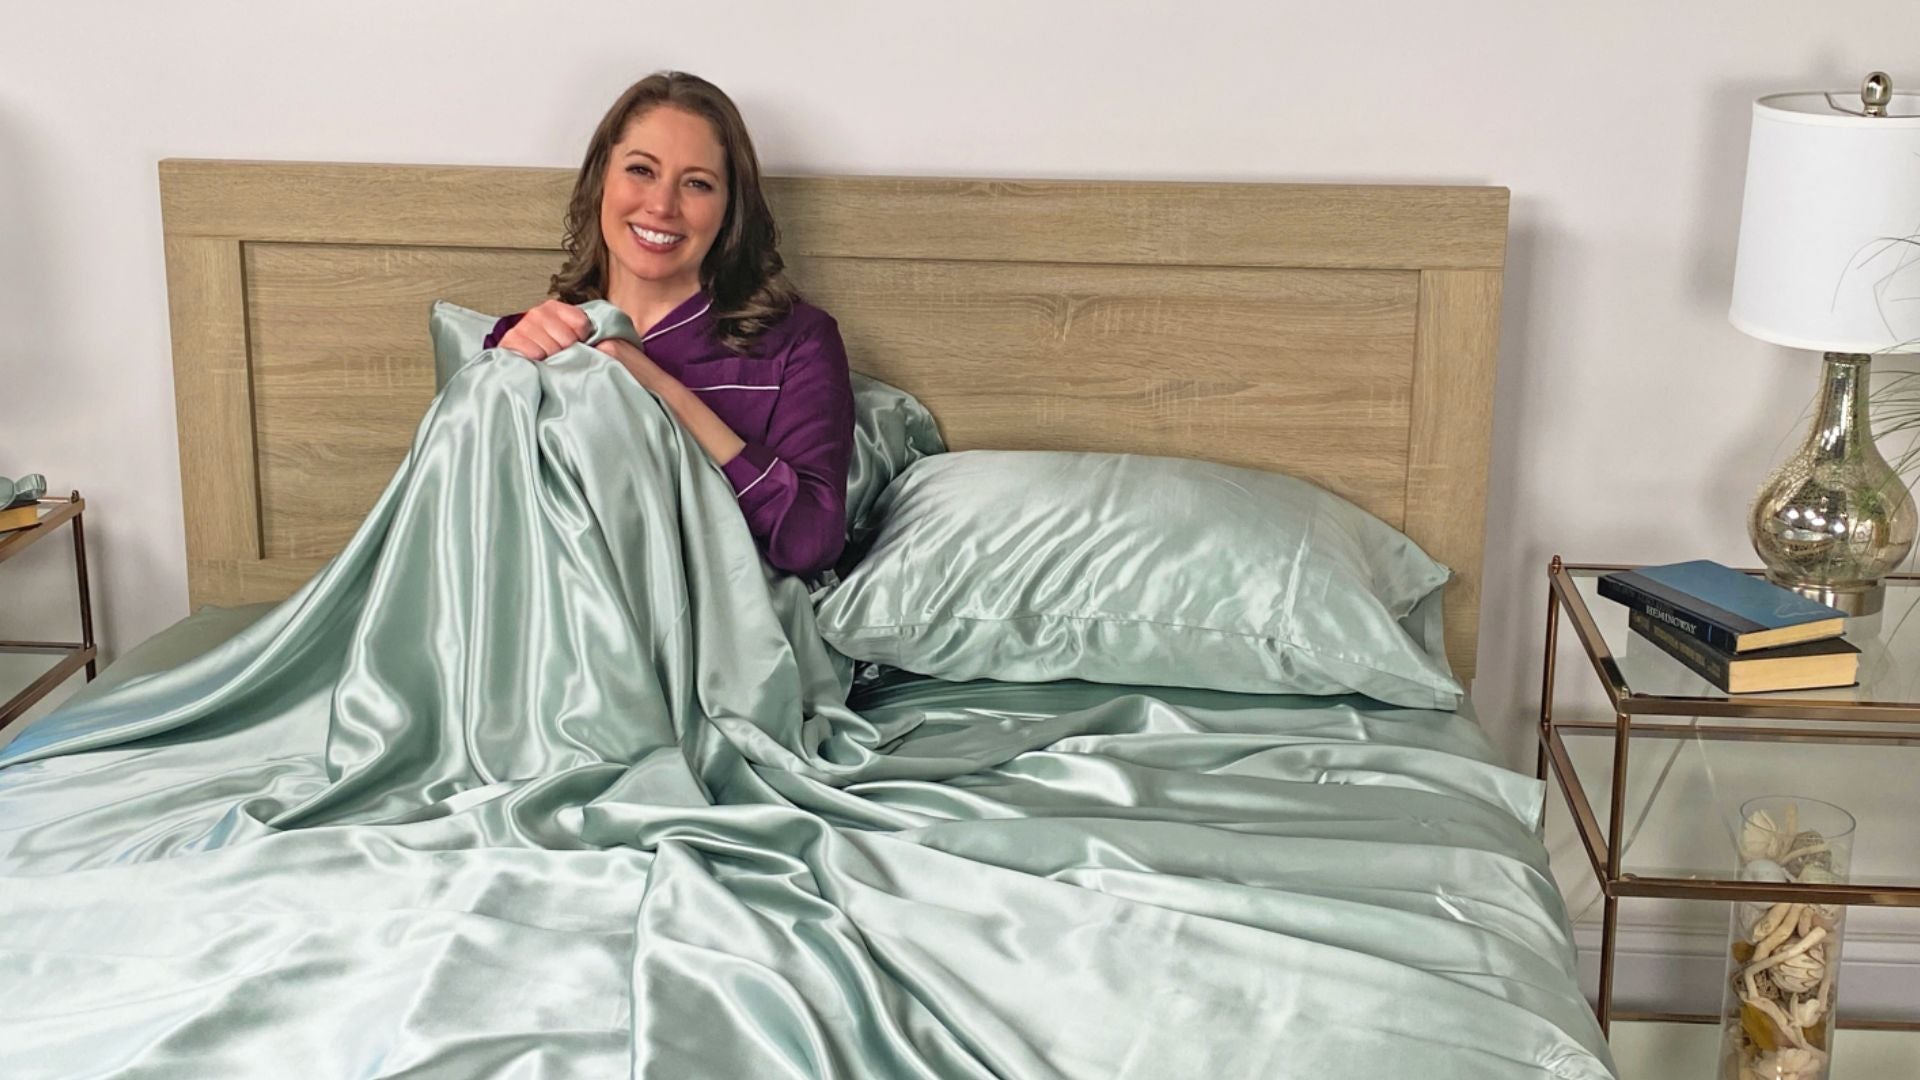 Silk Bedding: Expert Answers Your Questions About Silk Pillowcases, Sheets, Bedding, and More